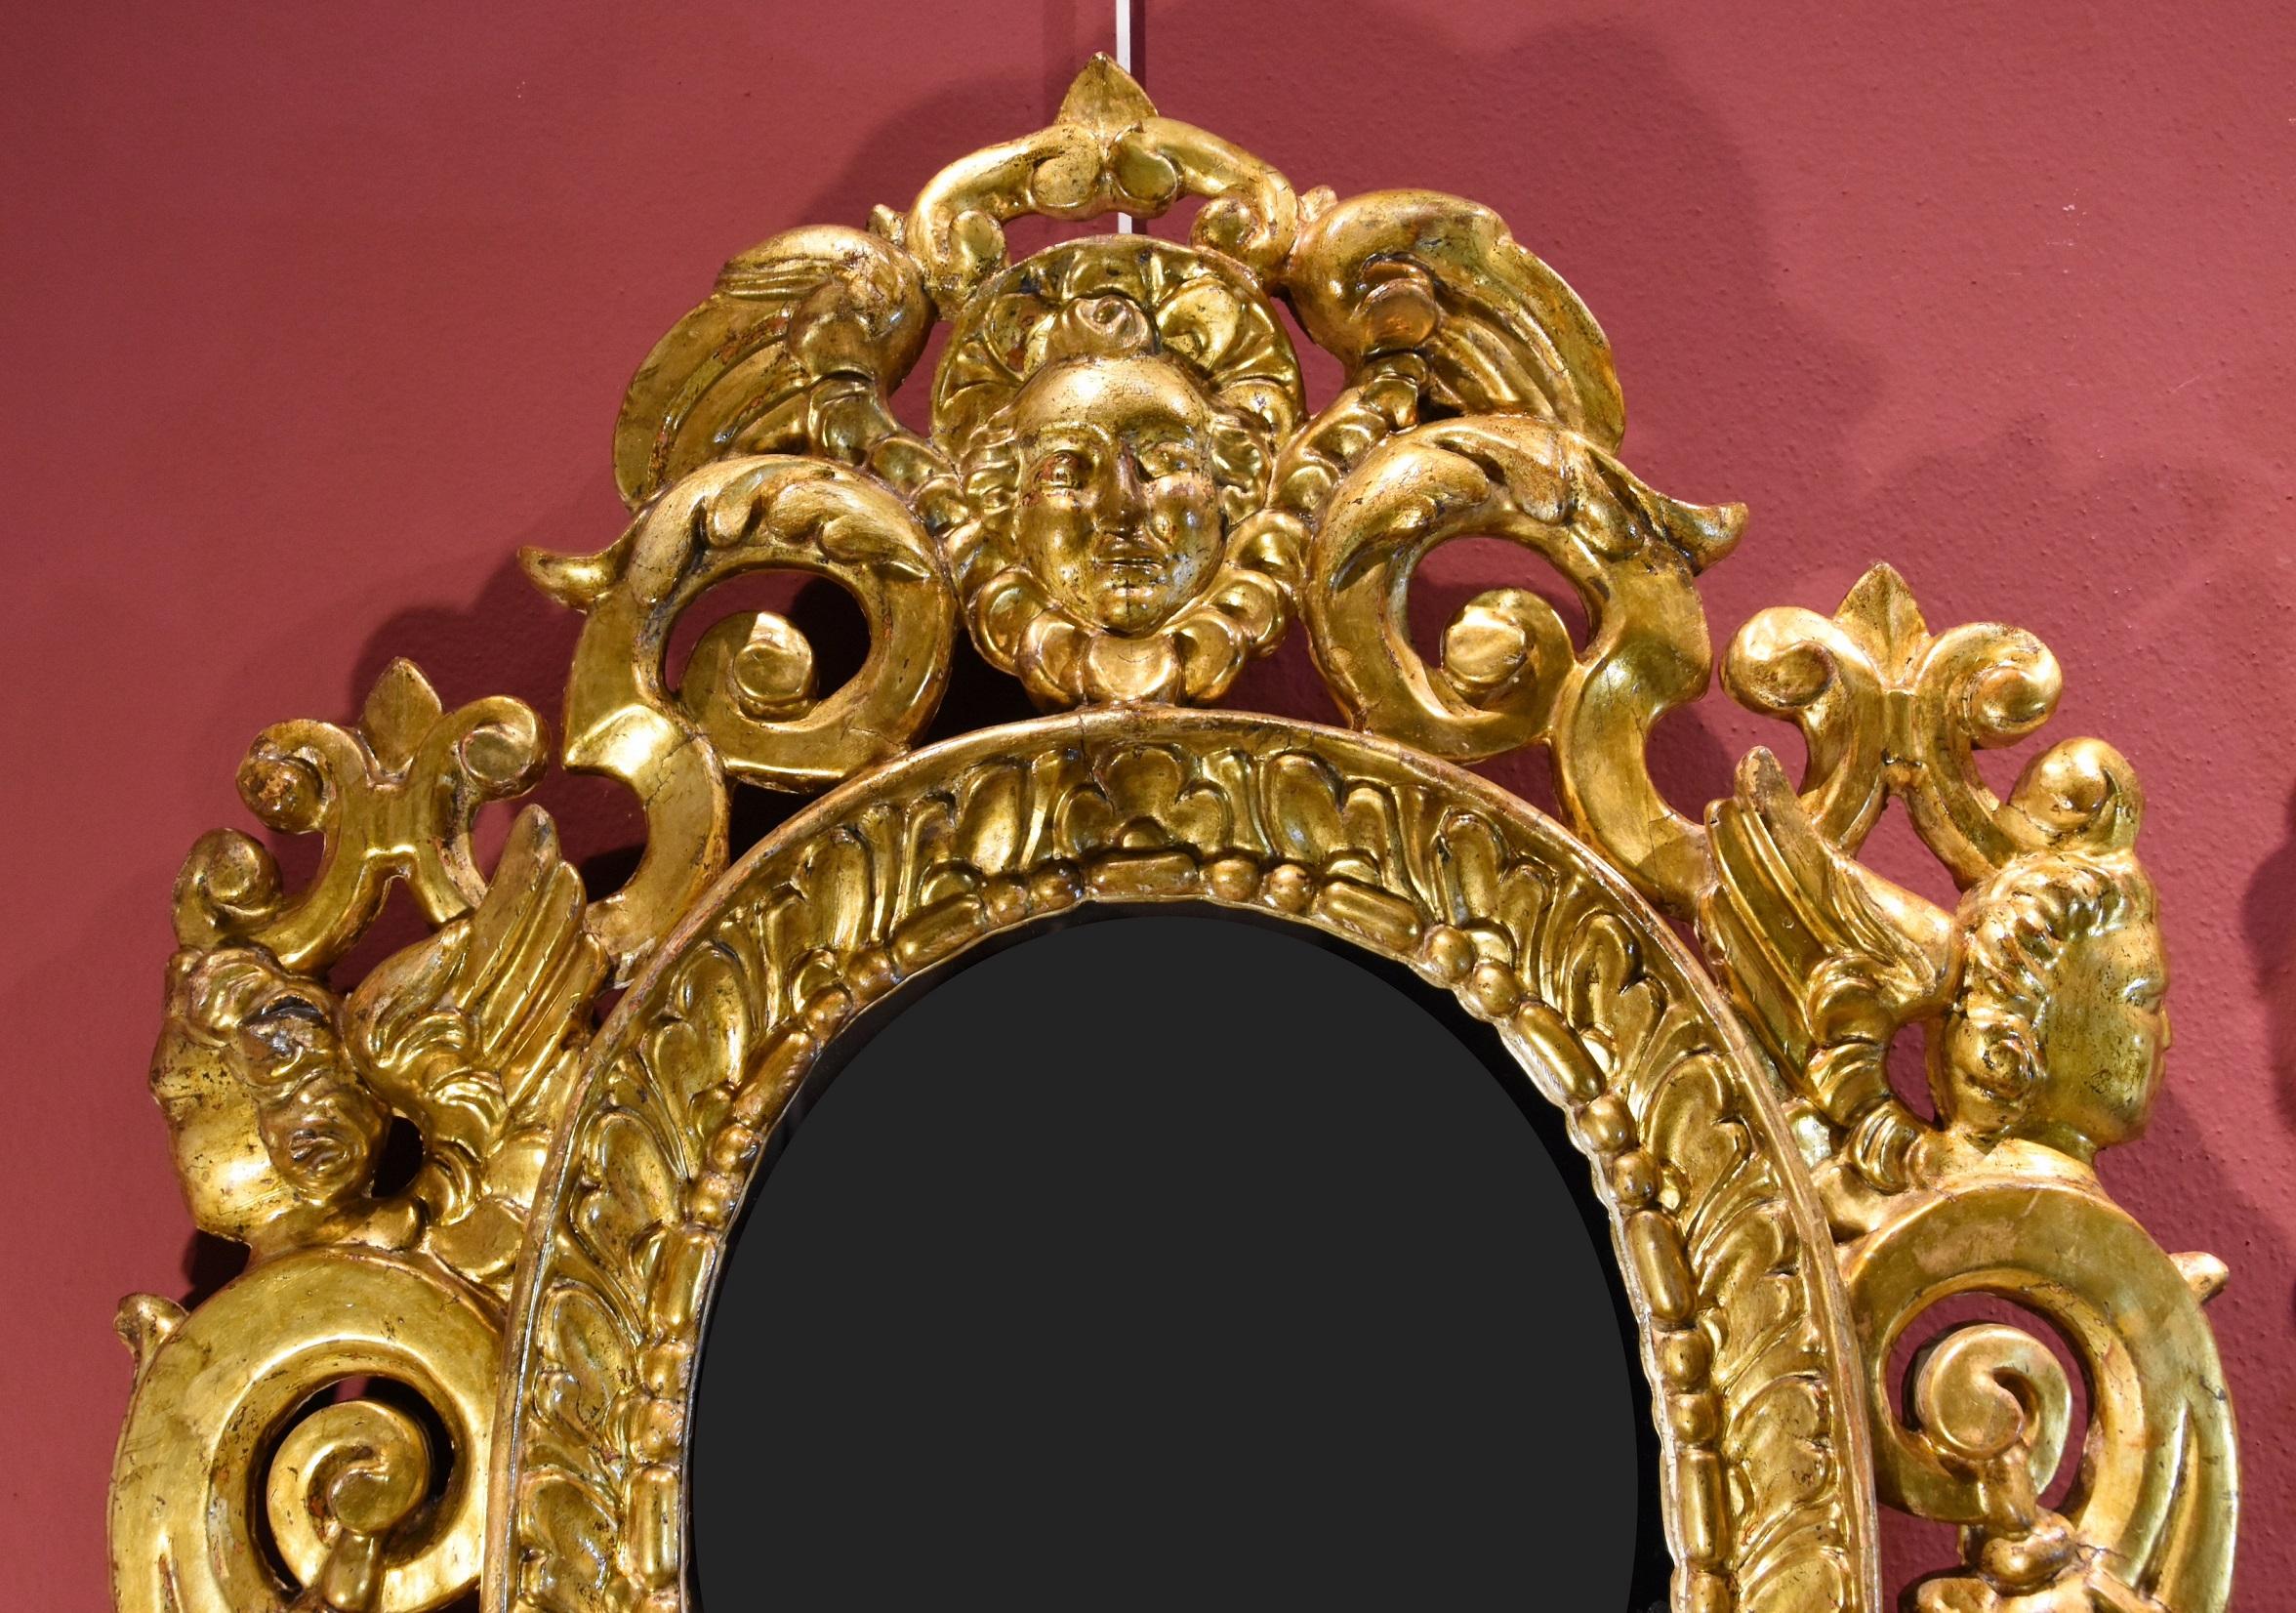 Pair Carved Gilded Mirrors Gold Wood Venice 18th Century Italy Quality Baroque For Sale 4